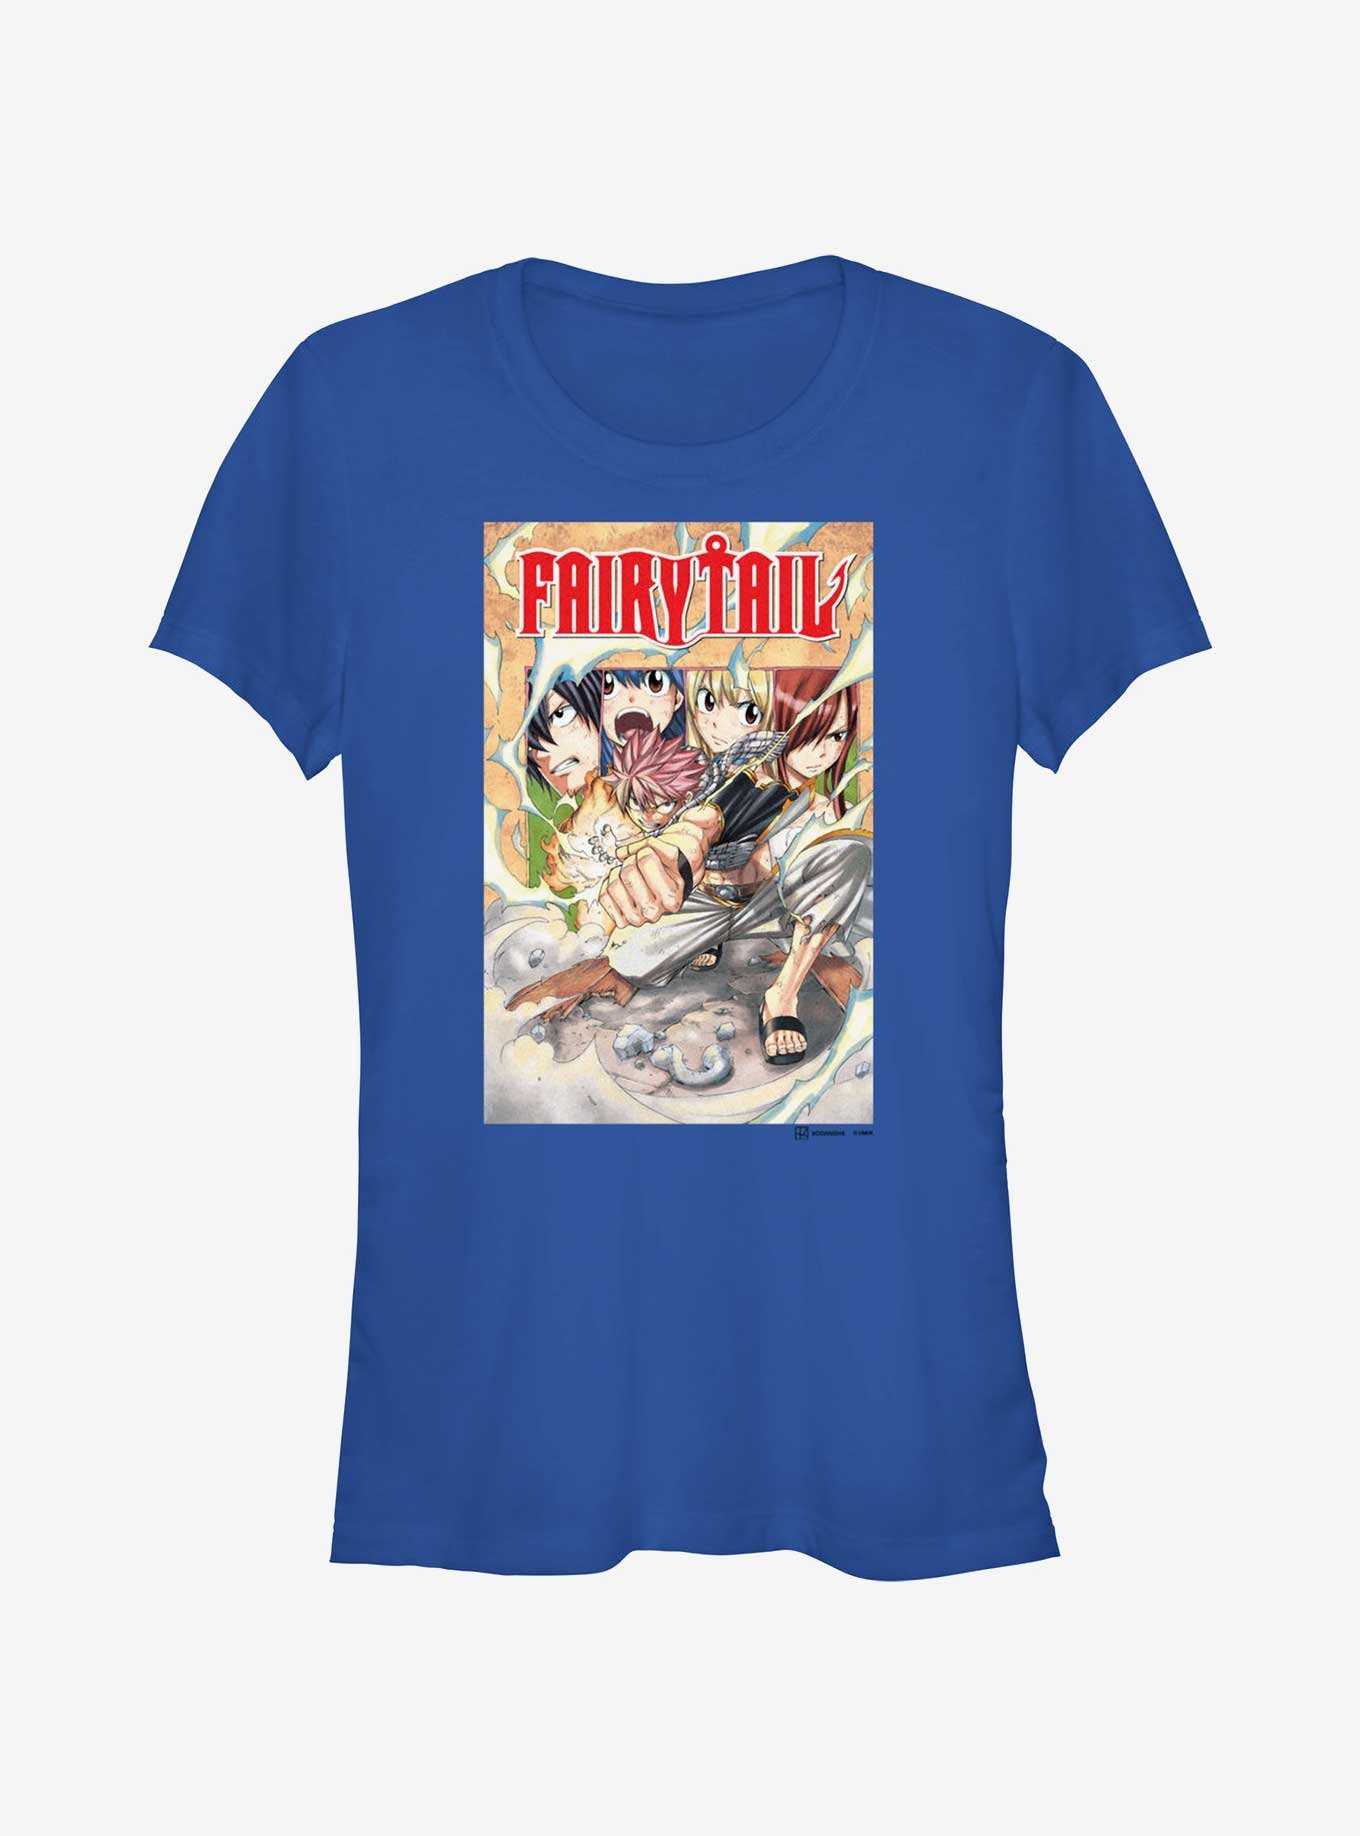 Fairy Tail Cover 3 Girls T-Shirt, , hi-res